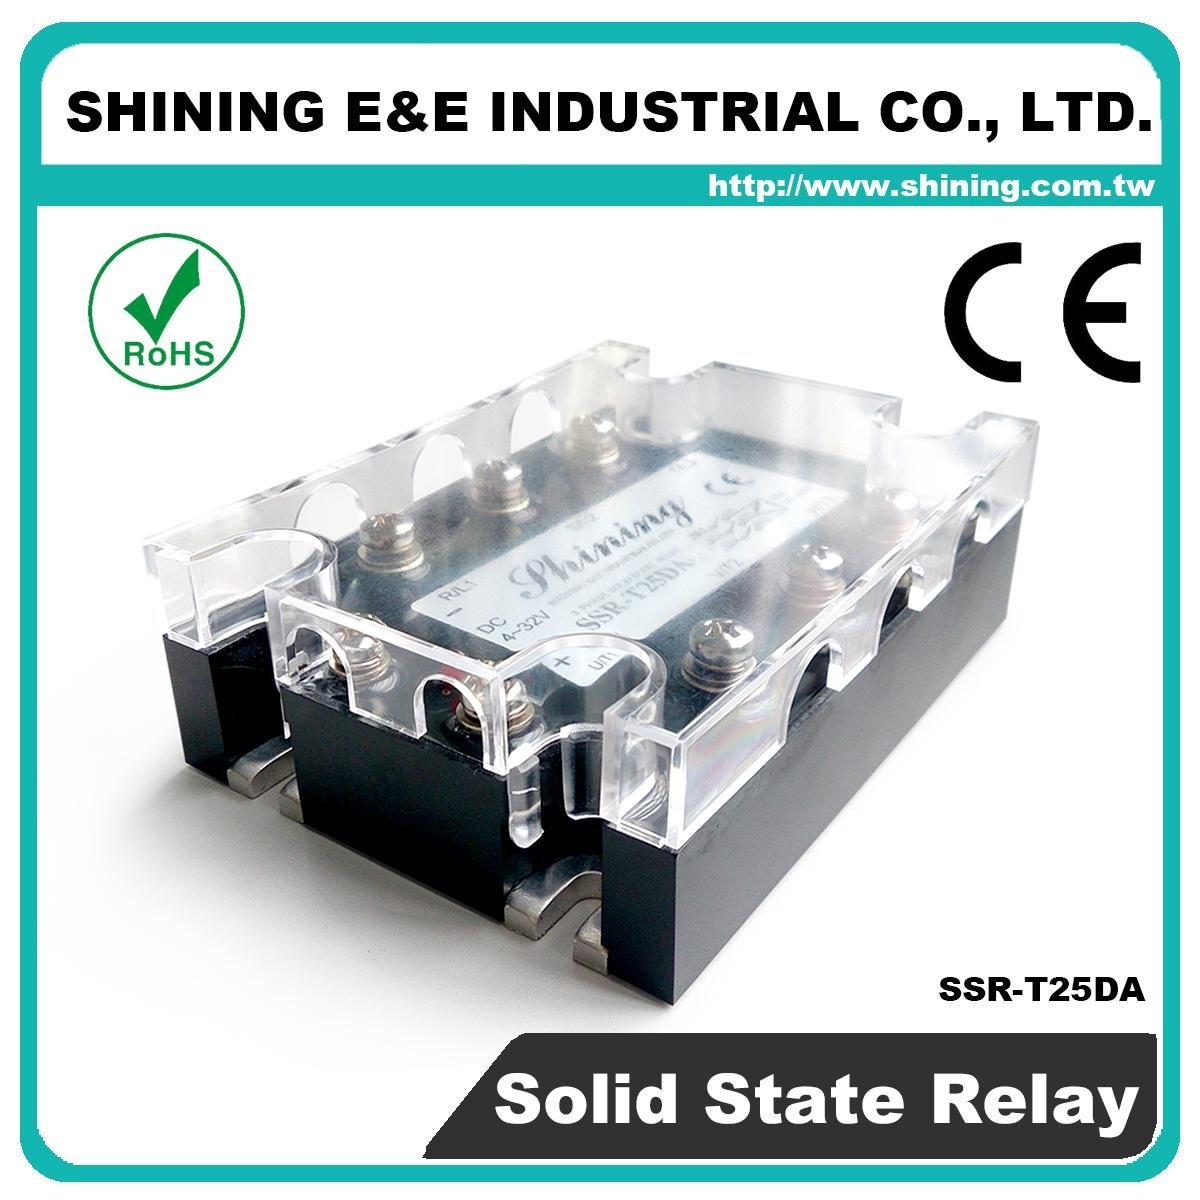 SSR-T25DA DC to AC Zero Cross Three Phase 25A Solid State Relays 5